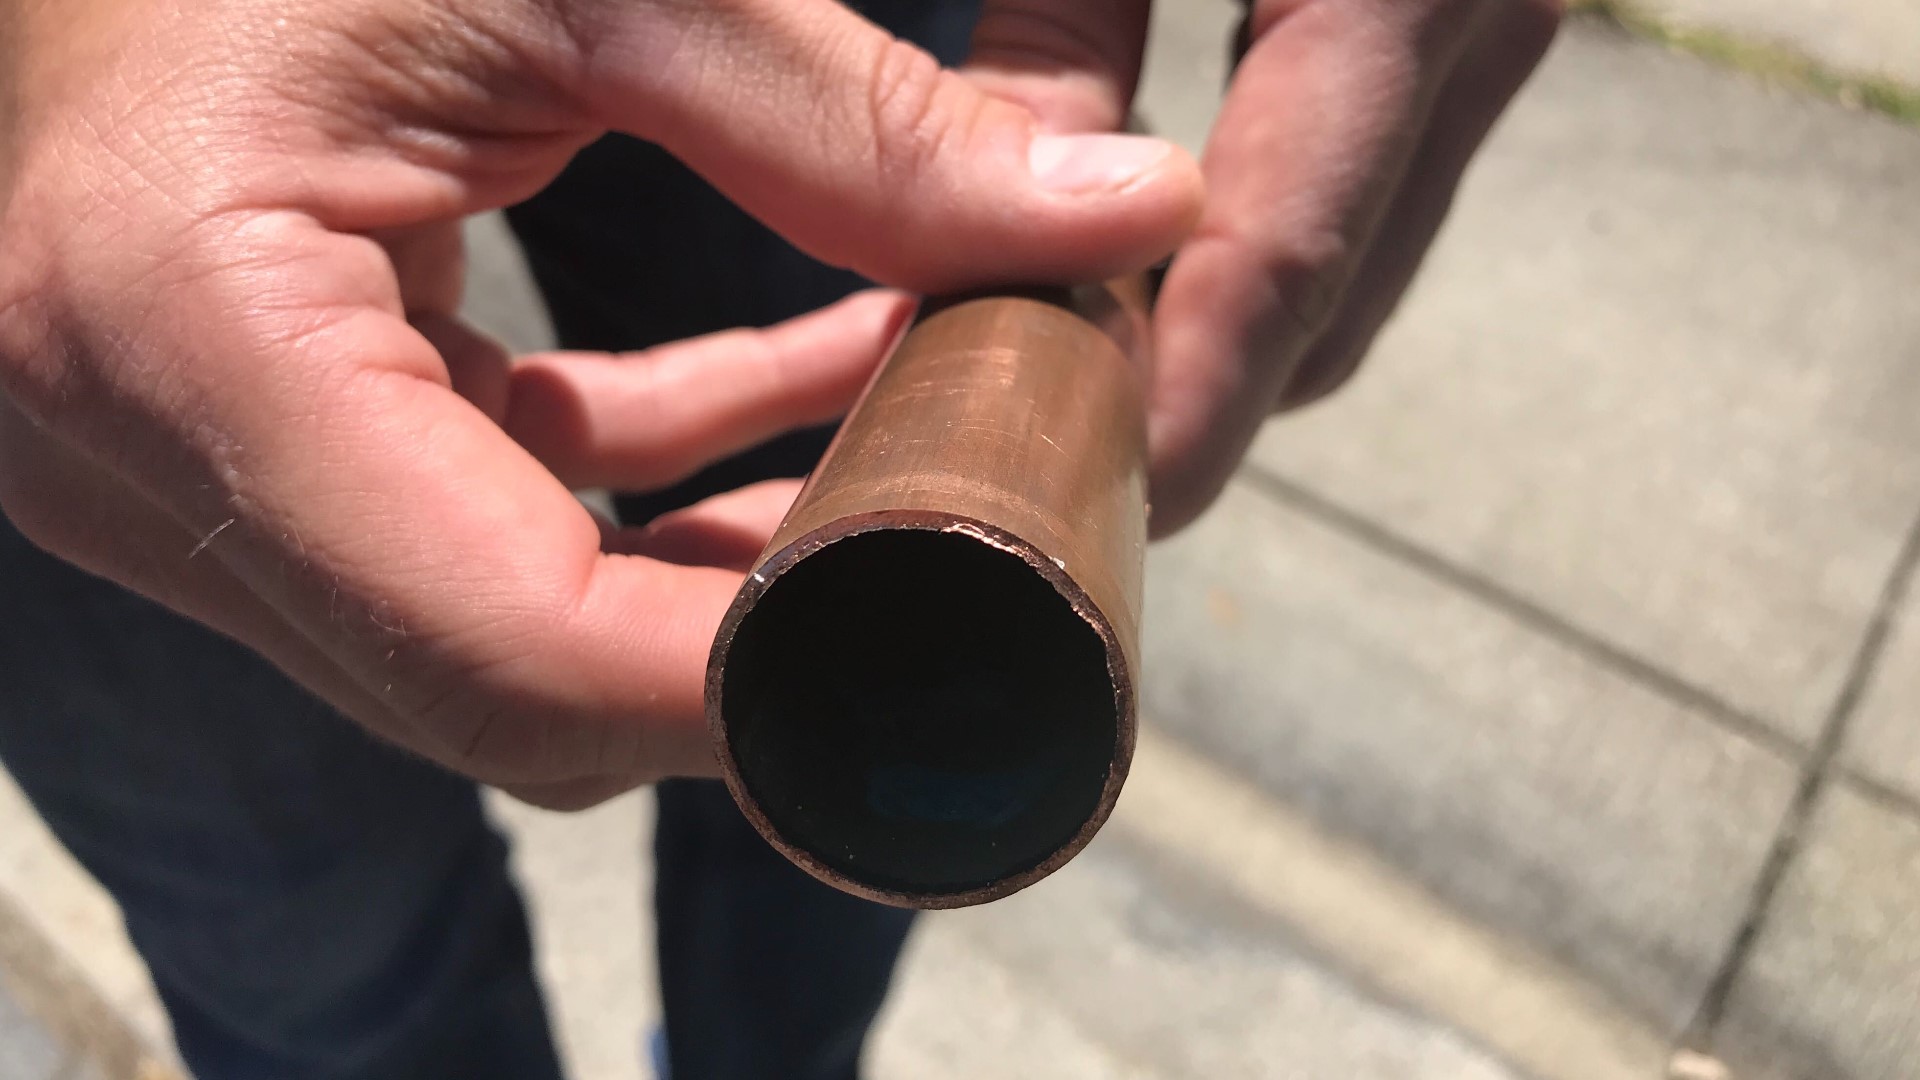 A local plumber said Folsom residents are seeing leaks because chemicals in the city's water are causing pipes to erode.